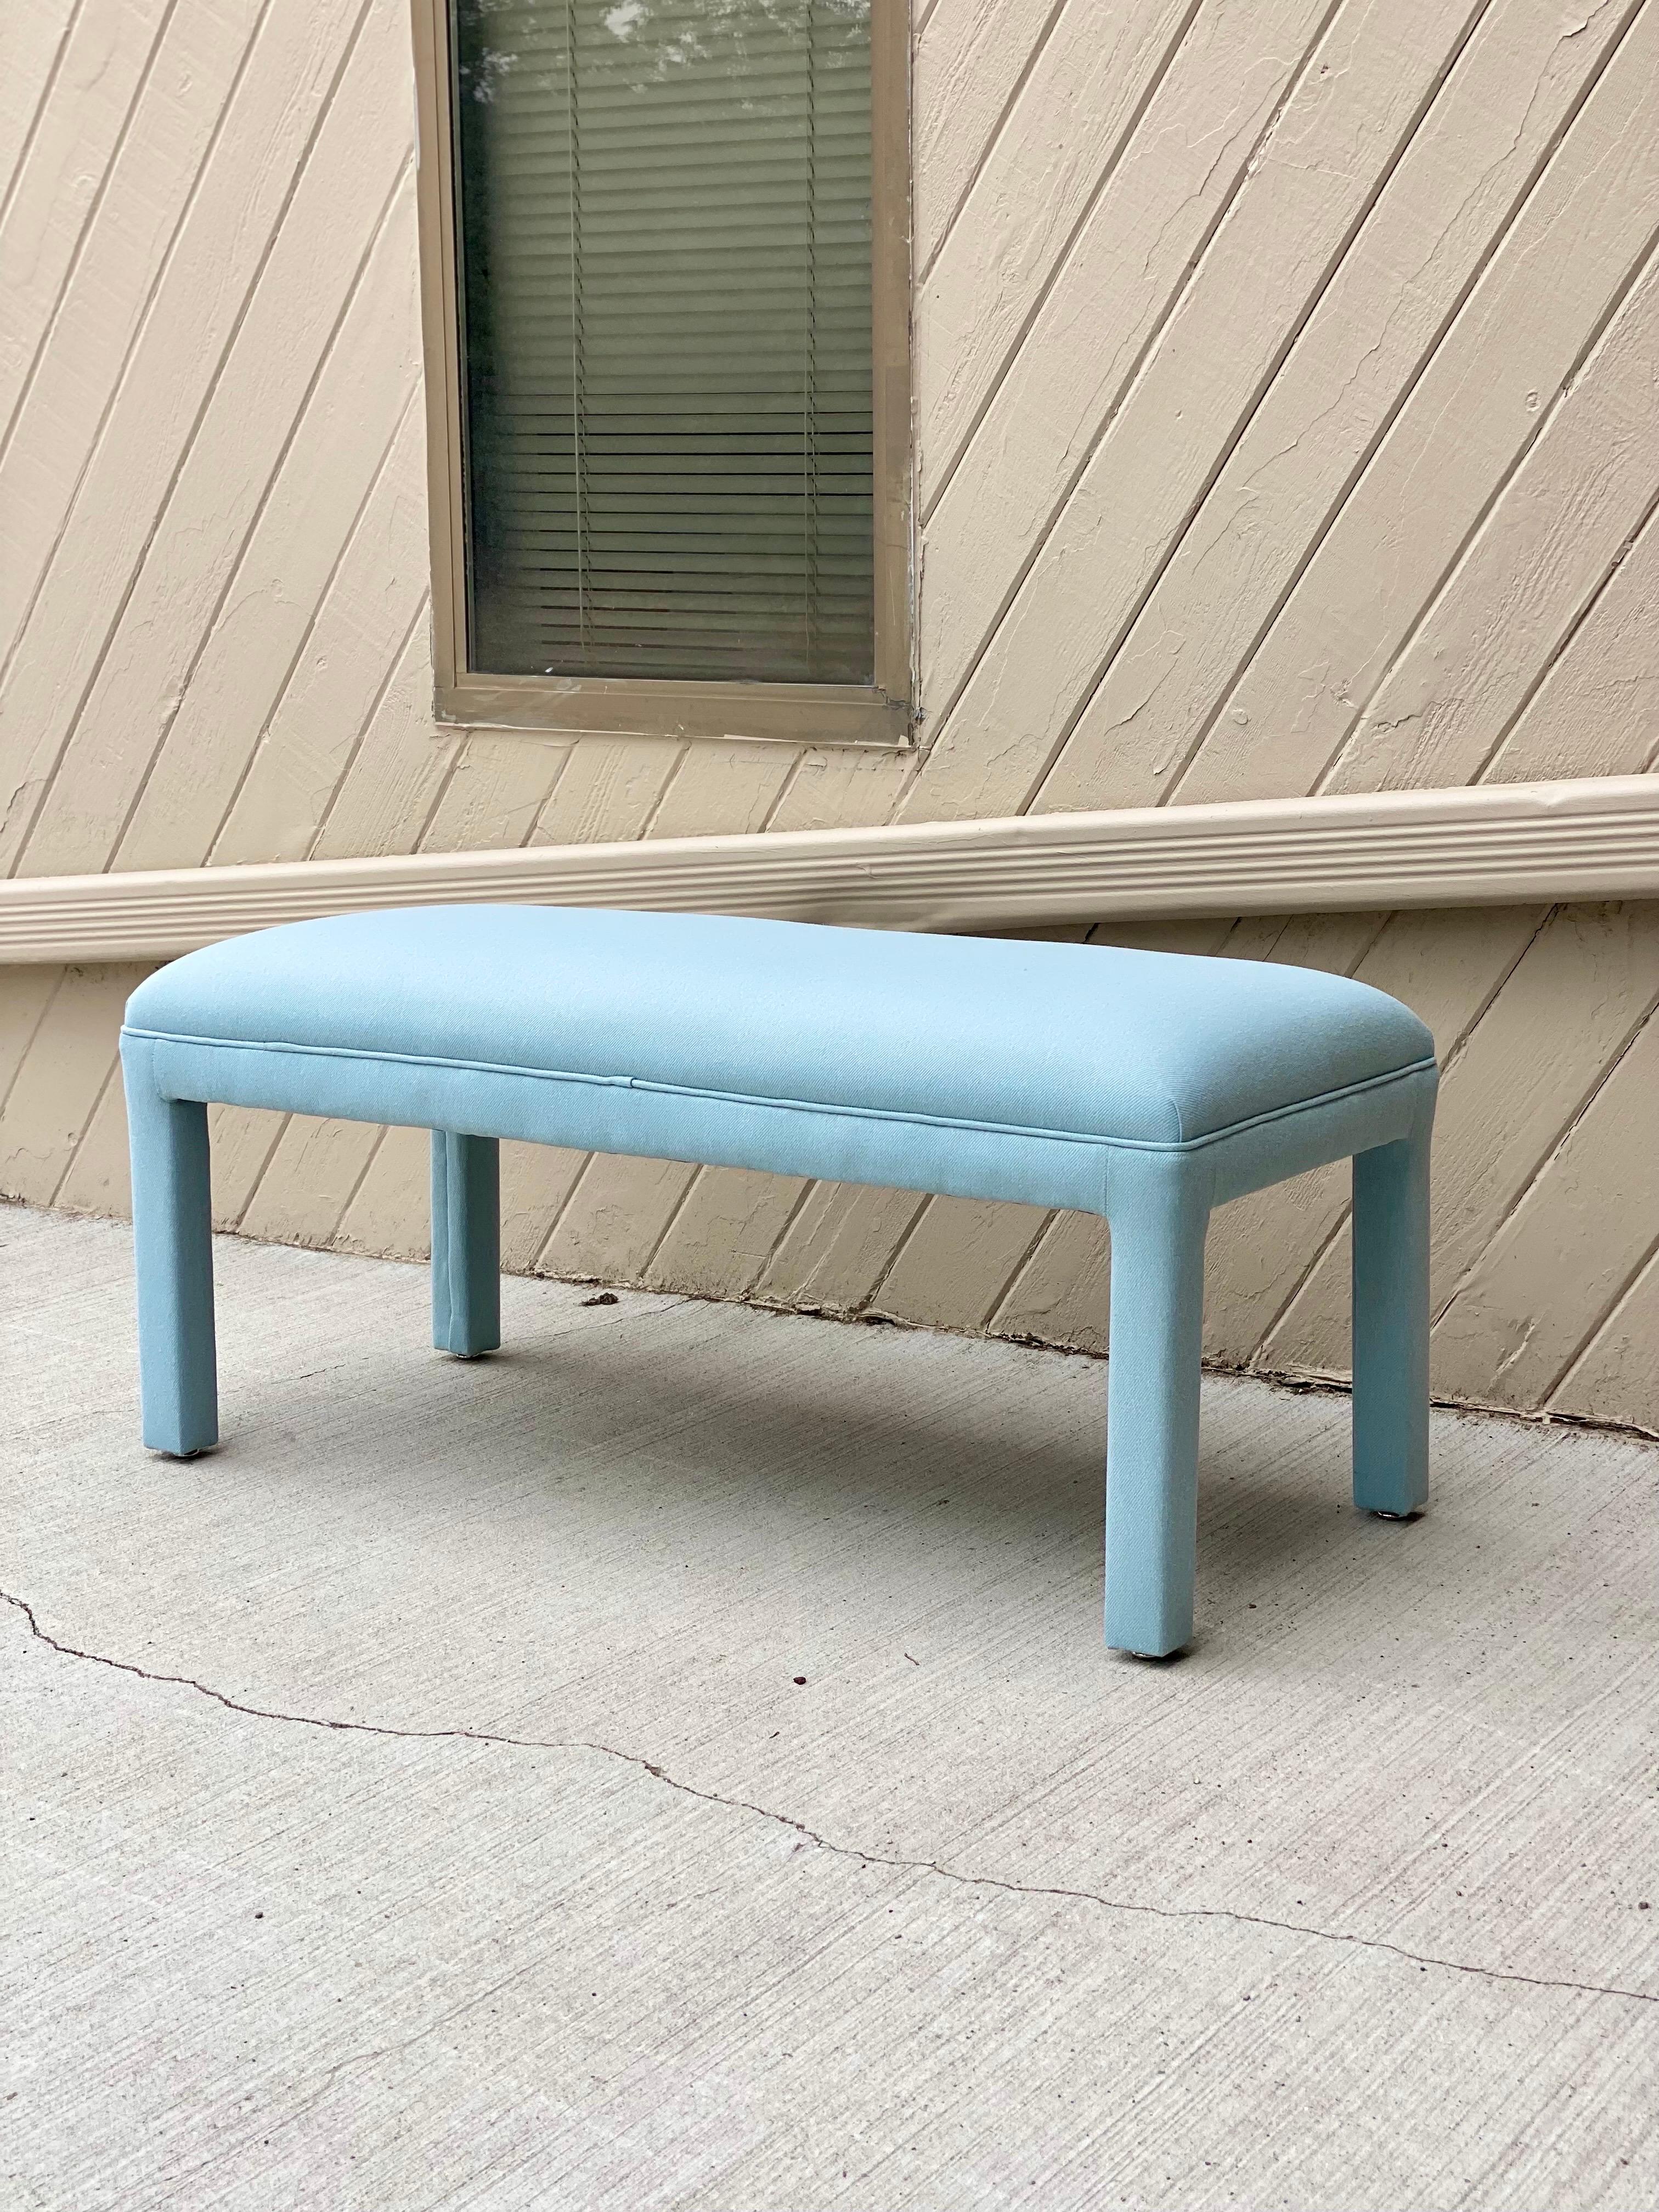 We are very pleased to offer a stylish Parsons bench, circa the 1980s. Add extra seating to your entryway or hallway with this gorgeous bench reupholstered in a soft and beautiful light blue fabric. This streamlined piece features a compact modern